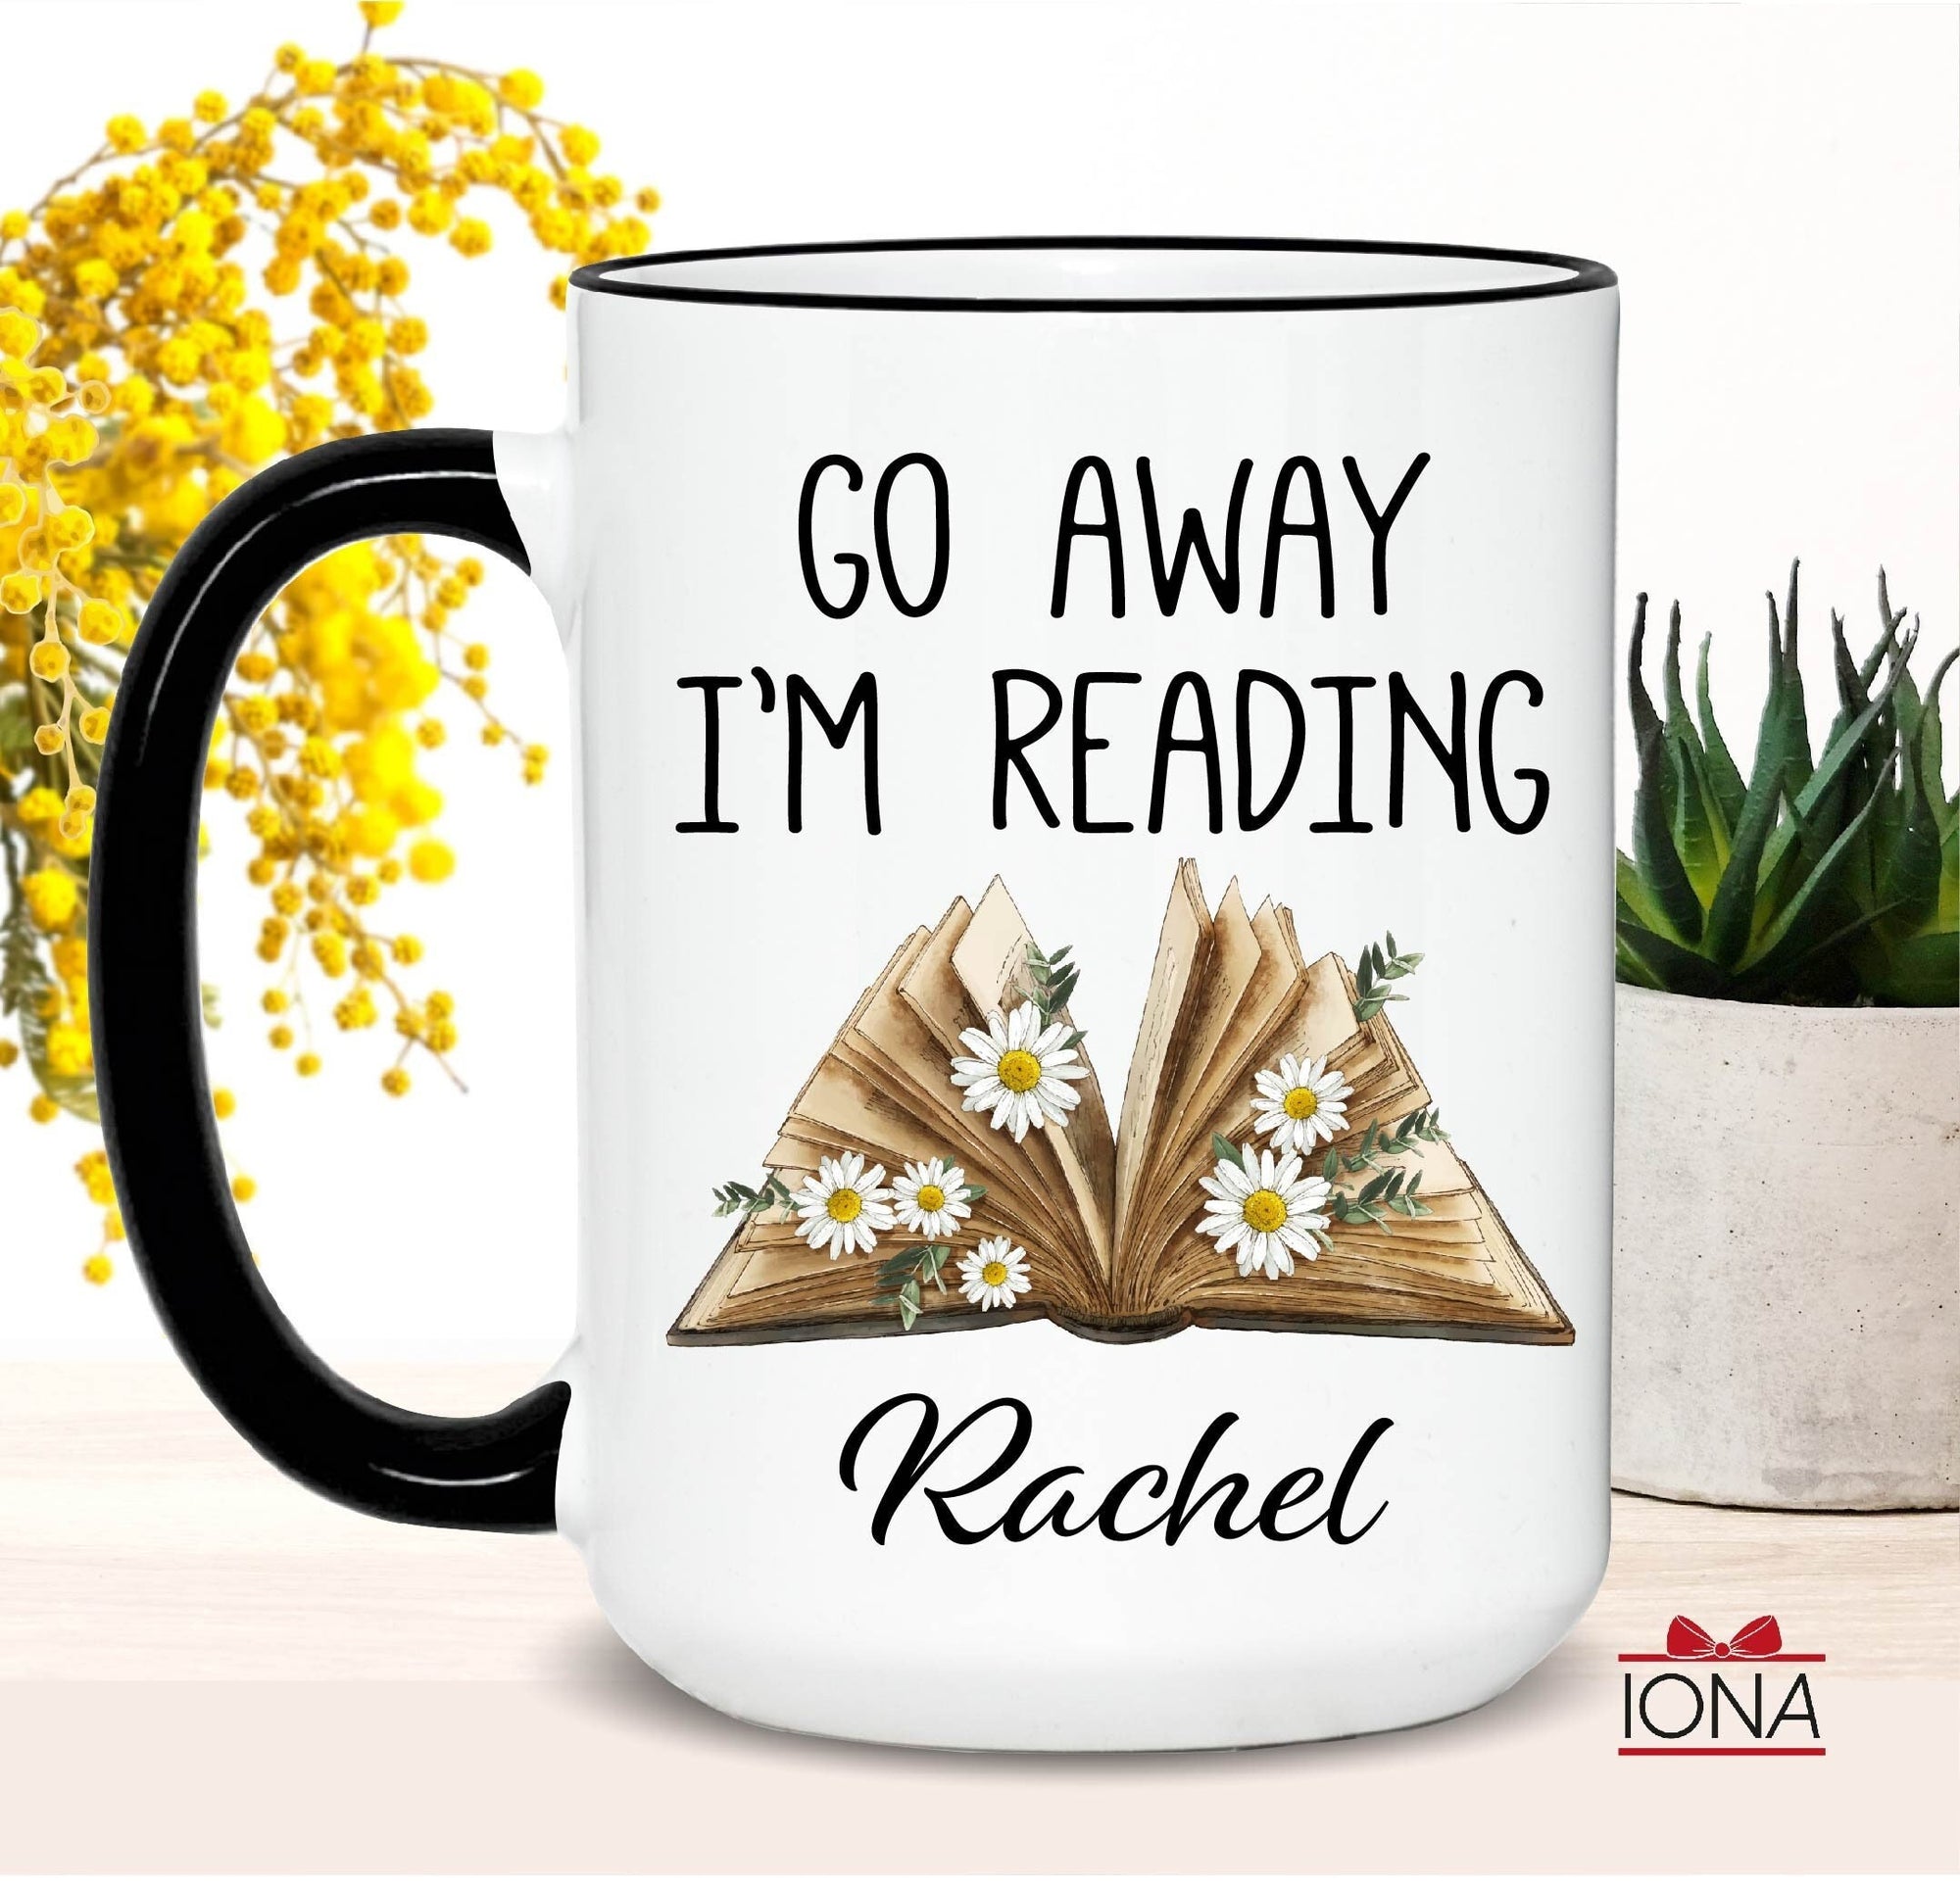 Personalized Reading Mug, Book Lover Gift, Book Mug, Bookish Gifts, go away i'm reading, Book Coffee Mug, Bookworm Gifts, gift for women